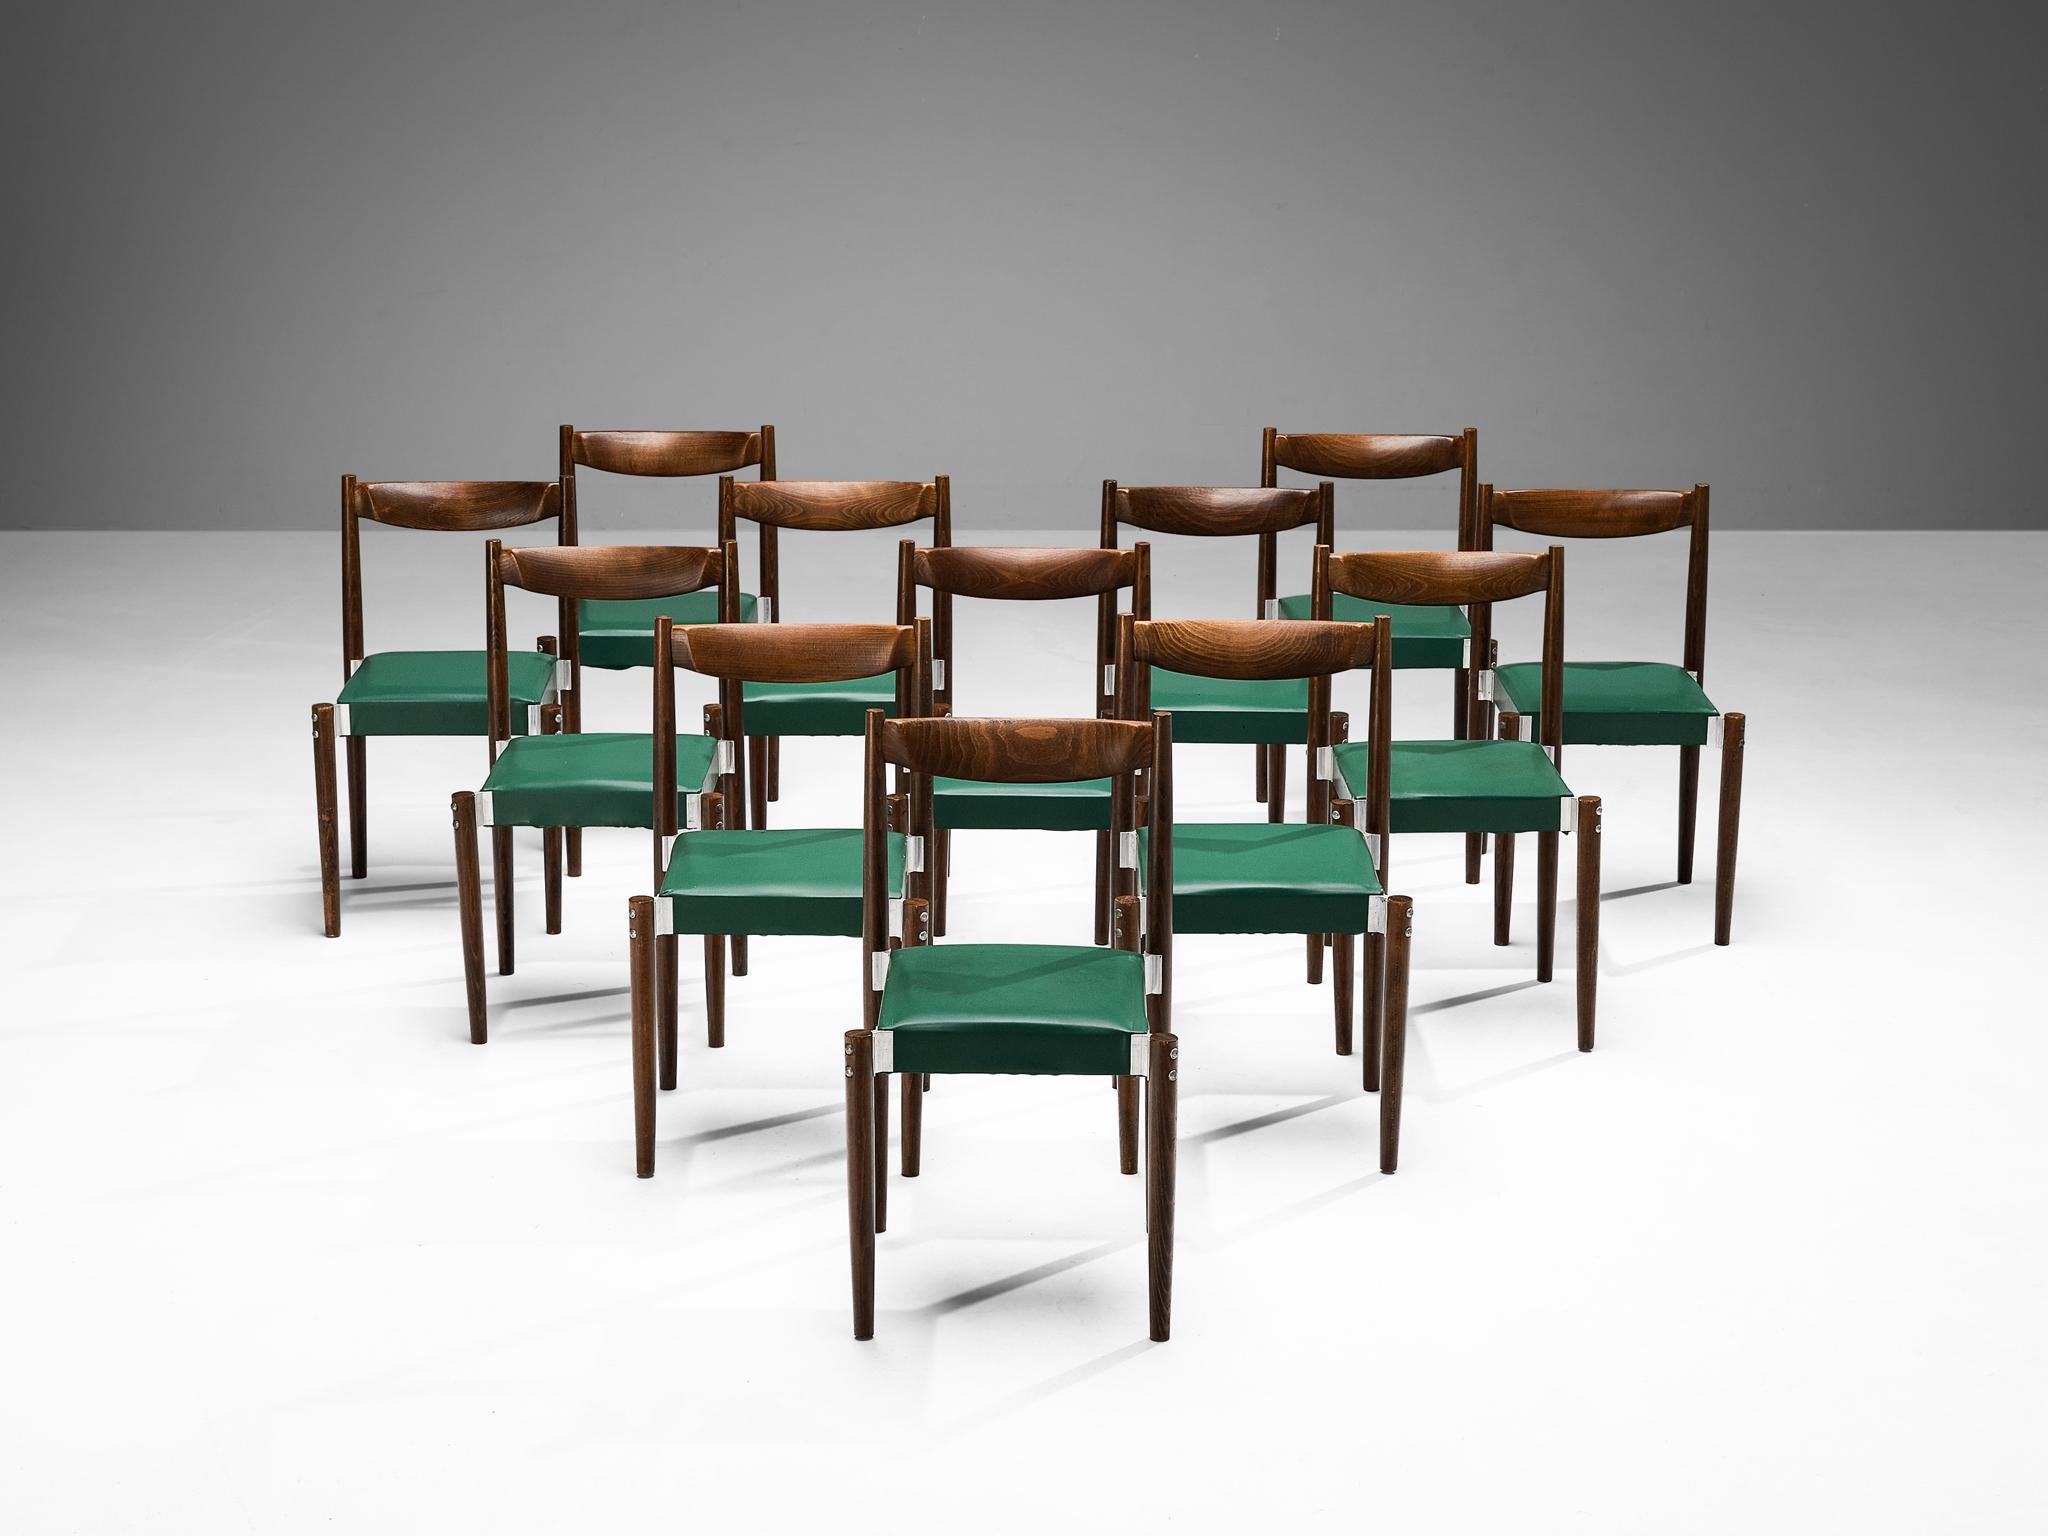 Set of twelve dining chairs, leatherette, stained beech, aluminum, Czech Republic, 1960s.

Well-proportioned set of dining chairs with constructive detailing discernible in the aluminum joints that connect the legs with the seat. The wooden frame is